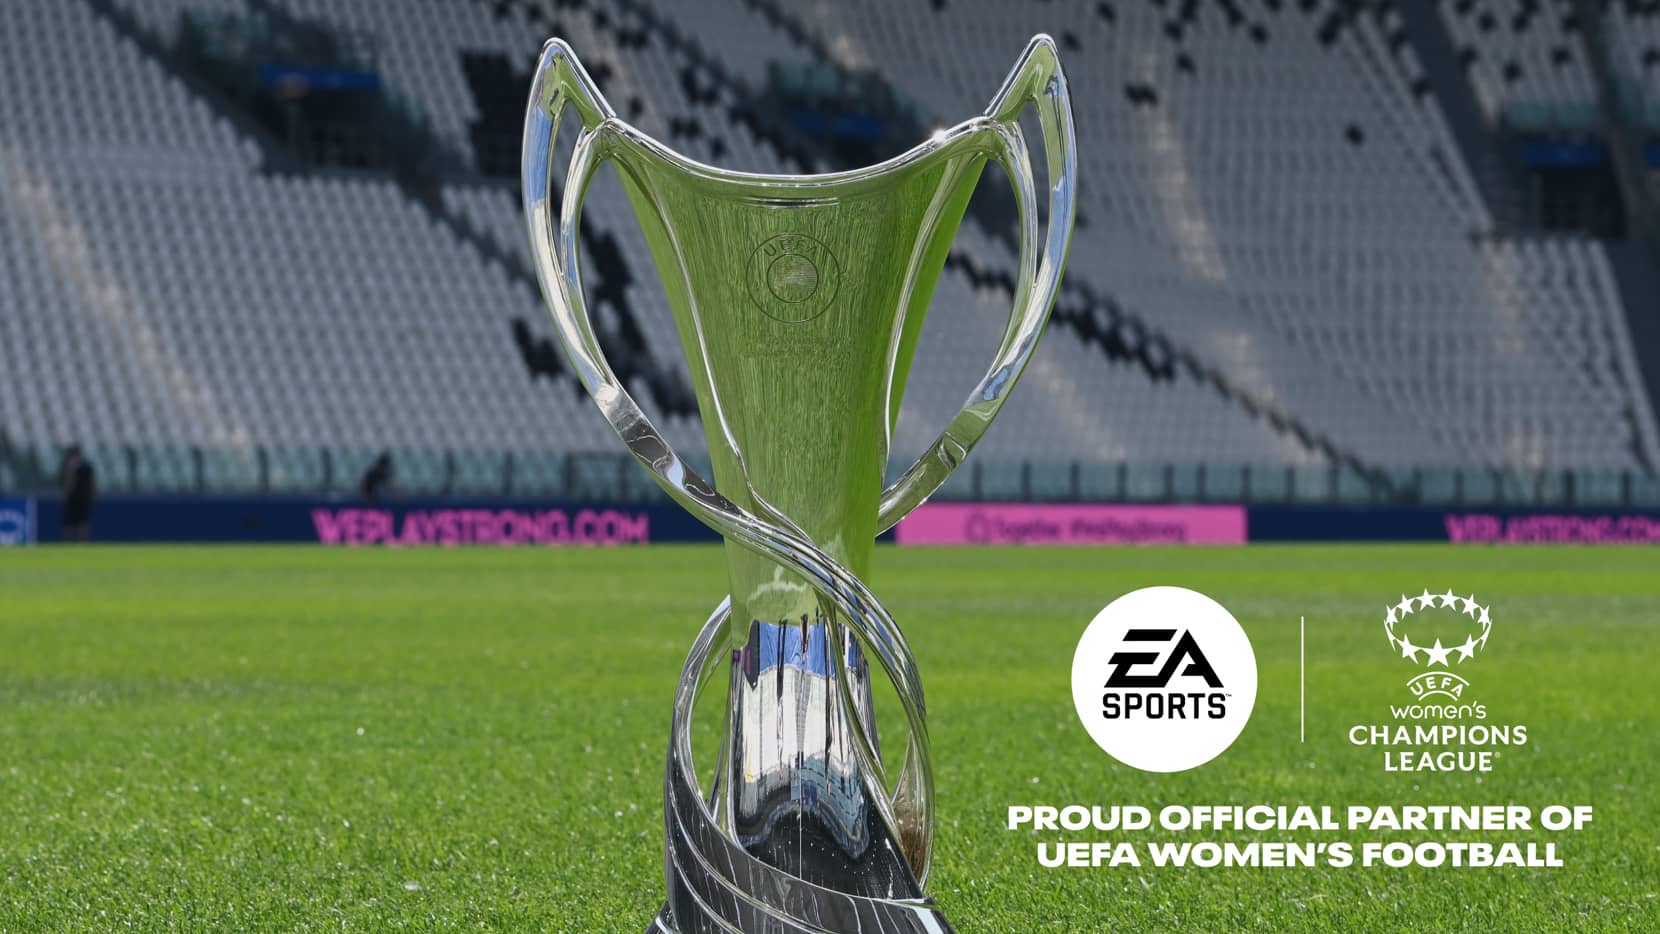 Ea sports furthers commitment to women’s football